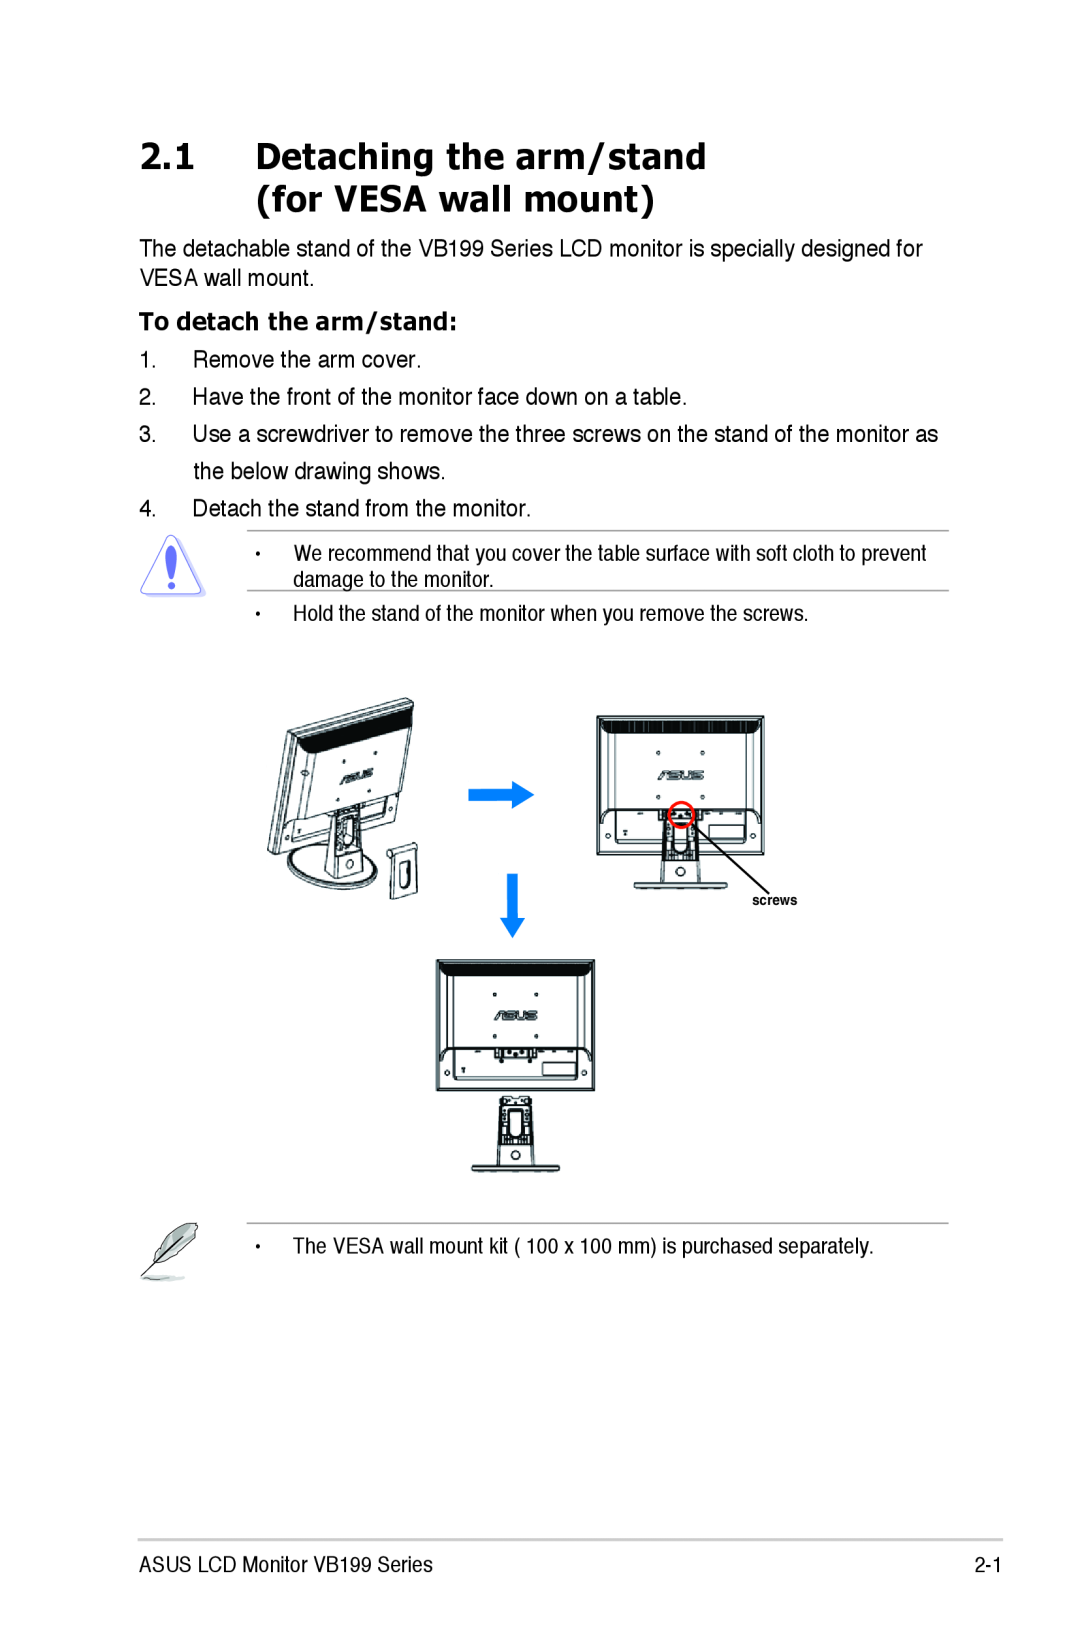 Asus VB199 Series manual Detaching the arm/stand for VESA wall mount, To detach the arm/stand 